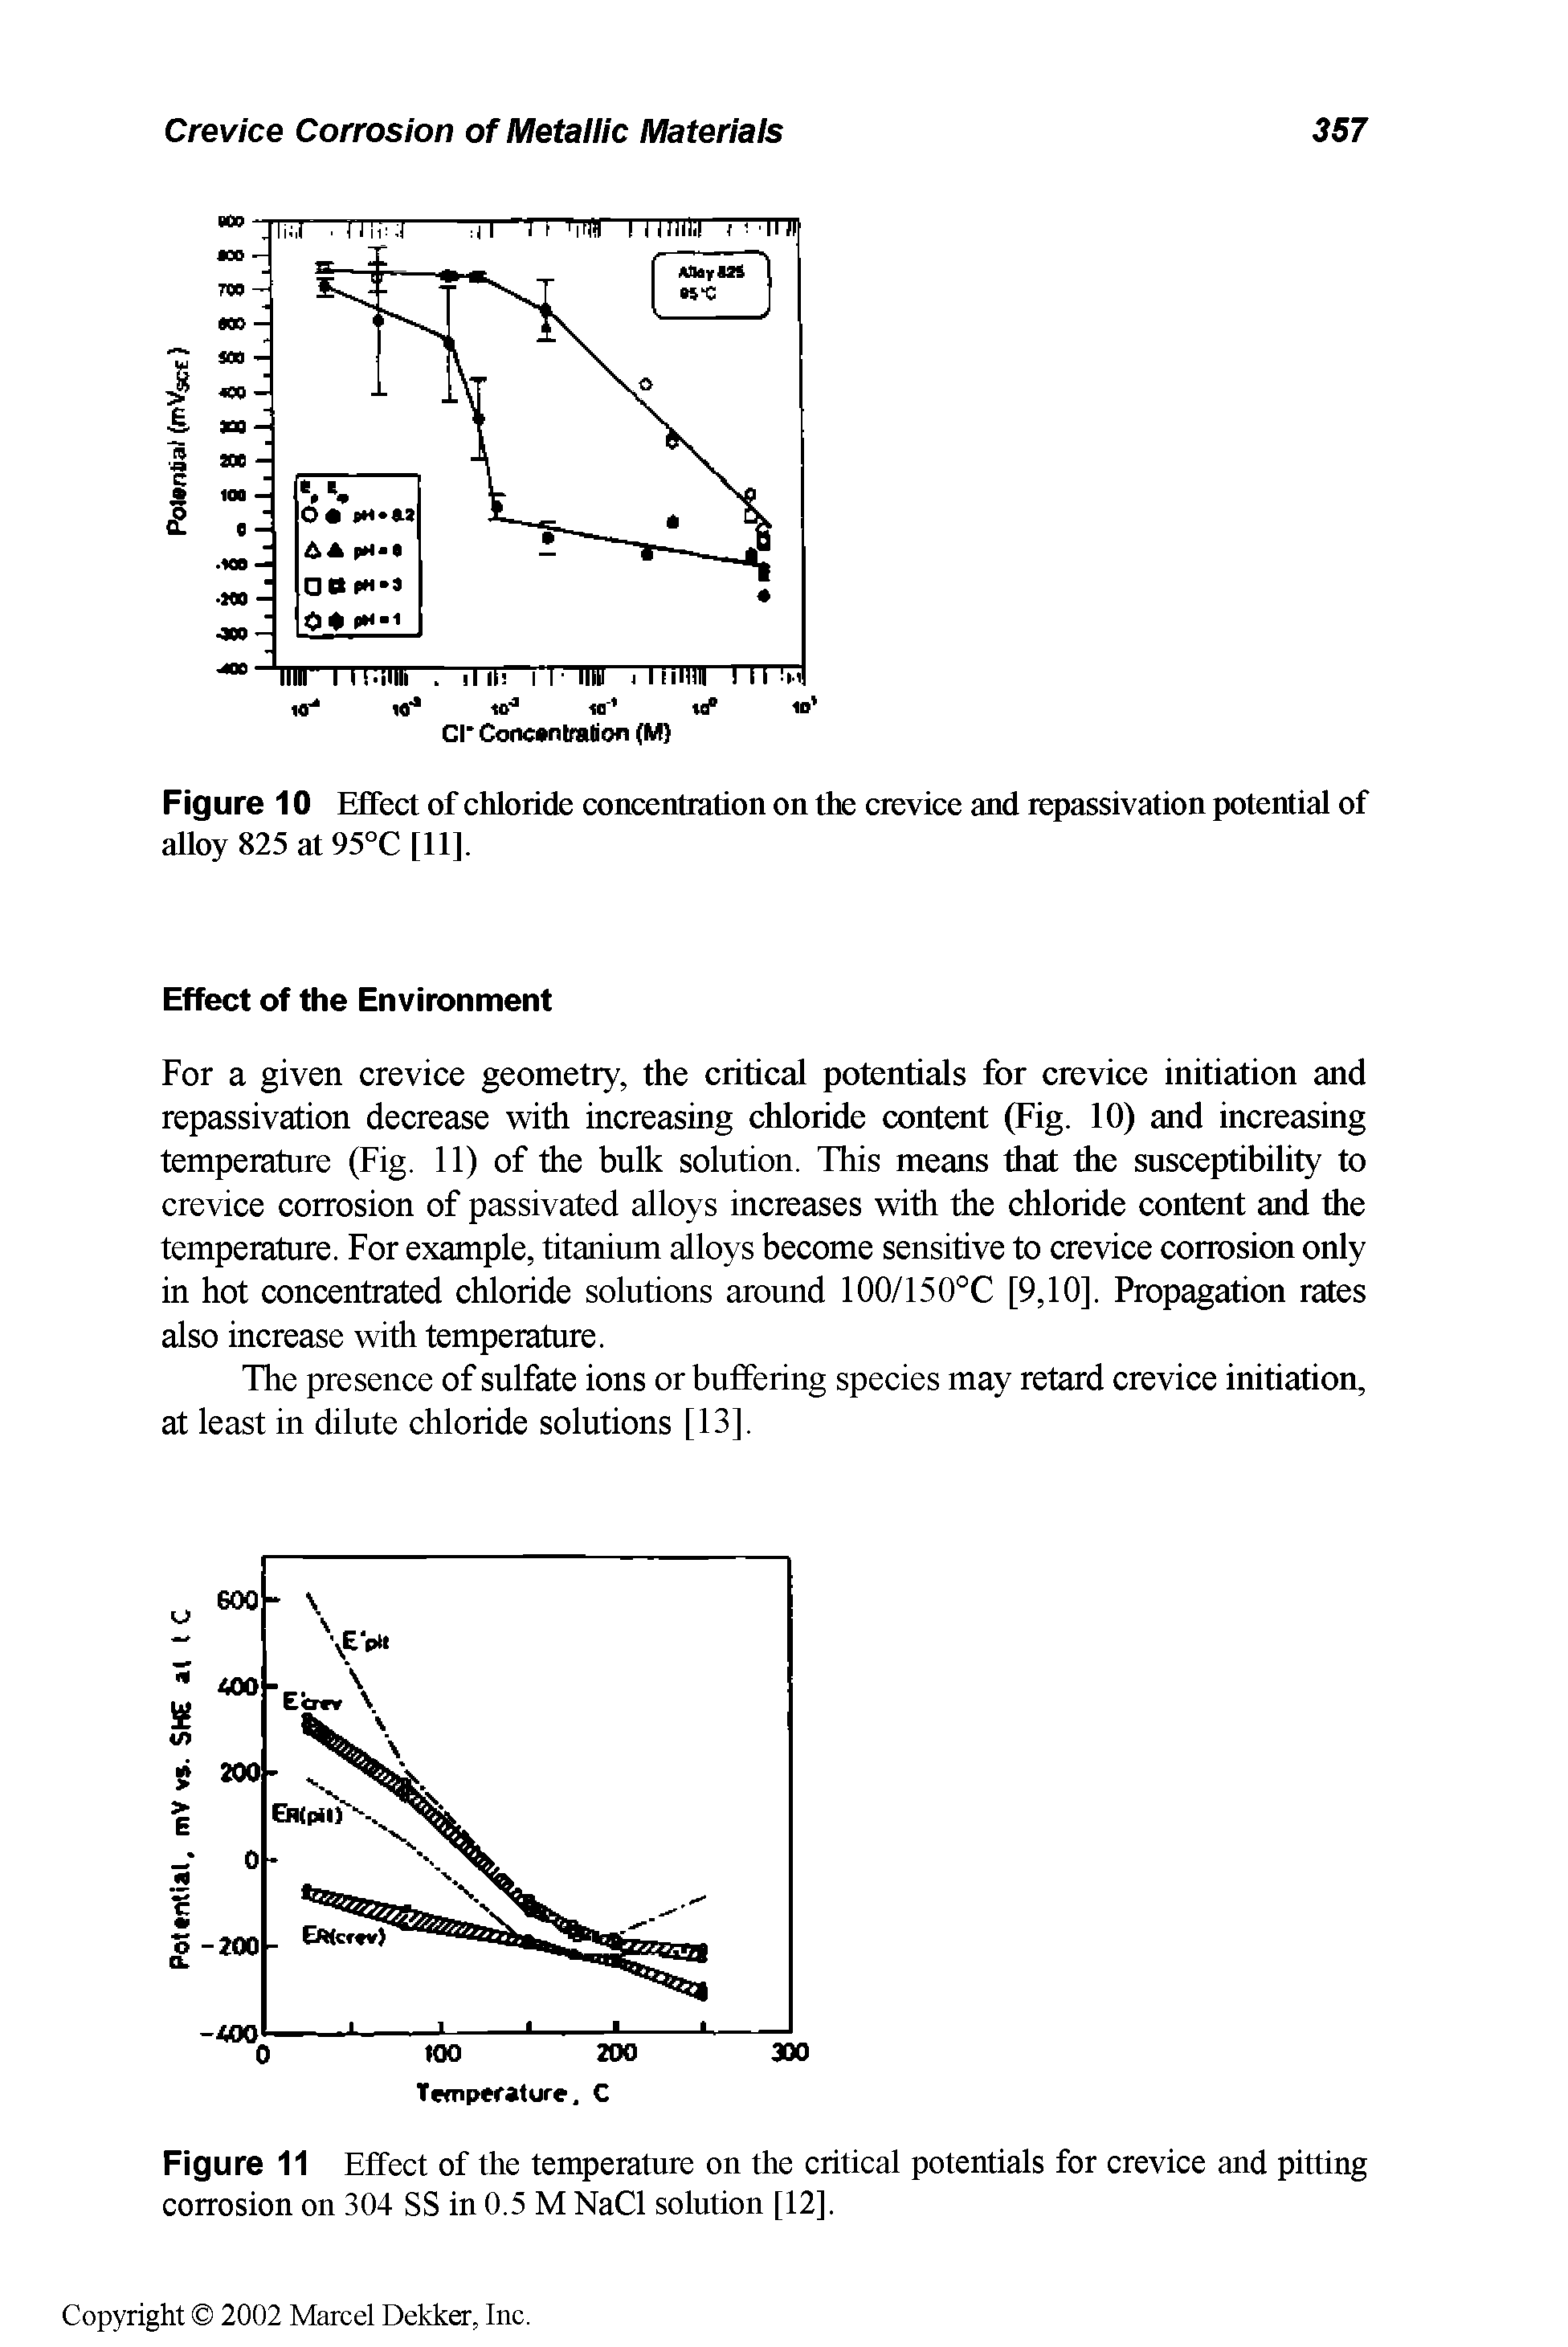 Figure 11 Effect of the temperature on the critical potentials for crevice and pitting corrosion on 304 SS in 0.5 M NaCl solution [12].